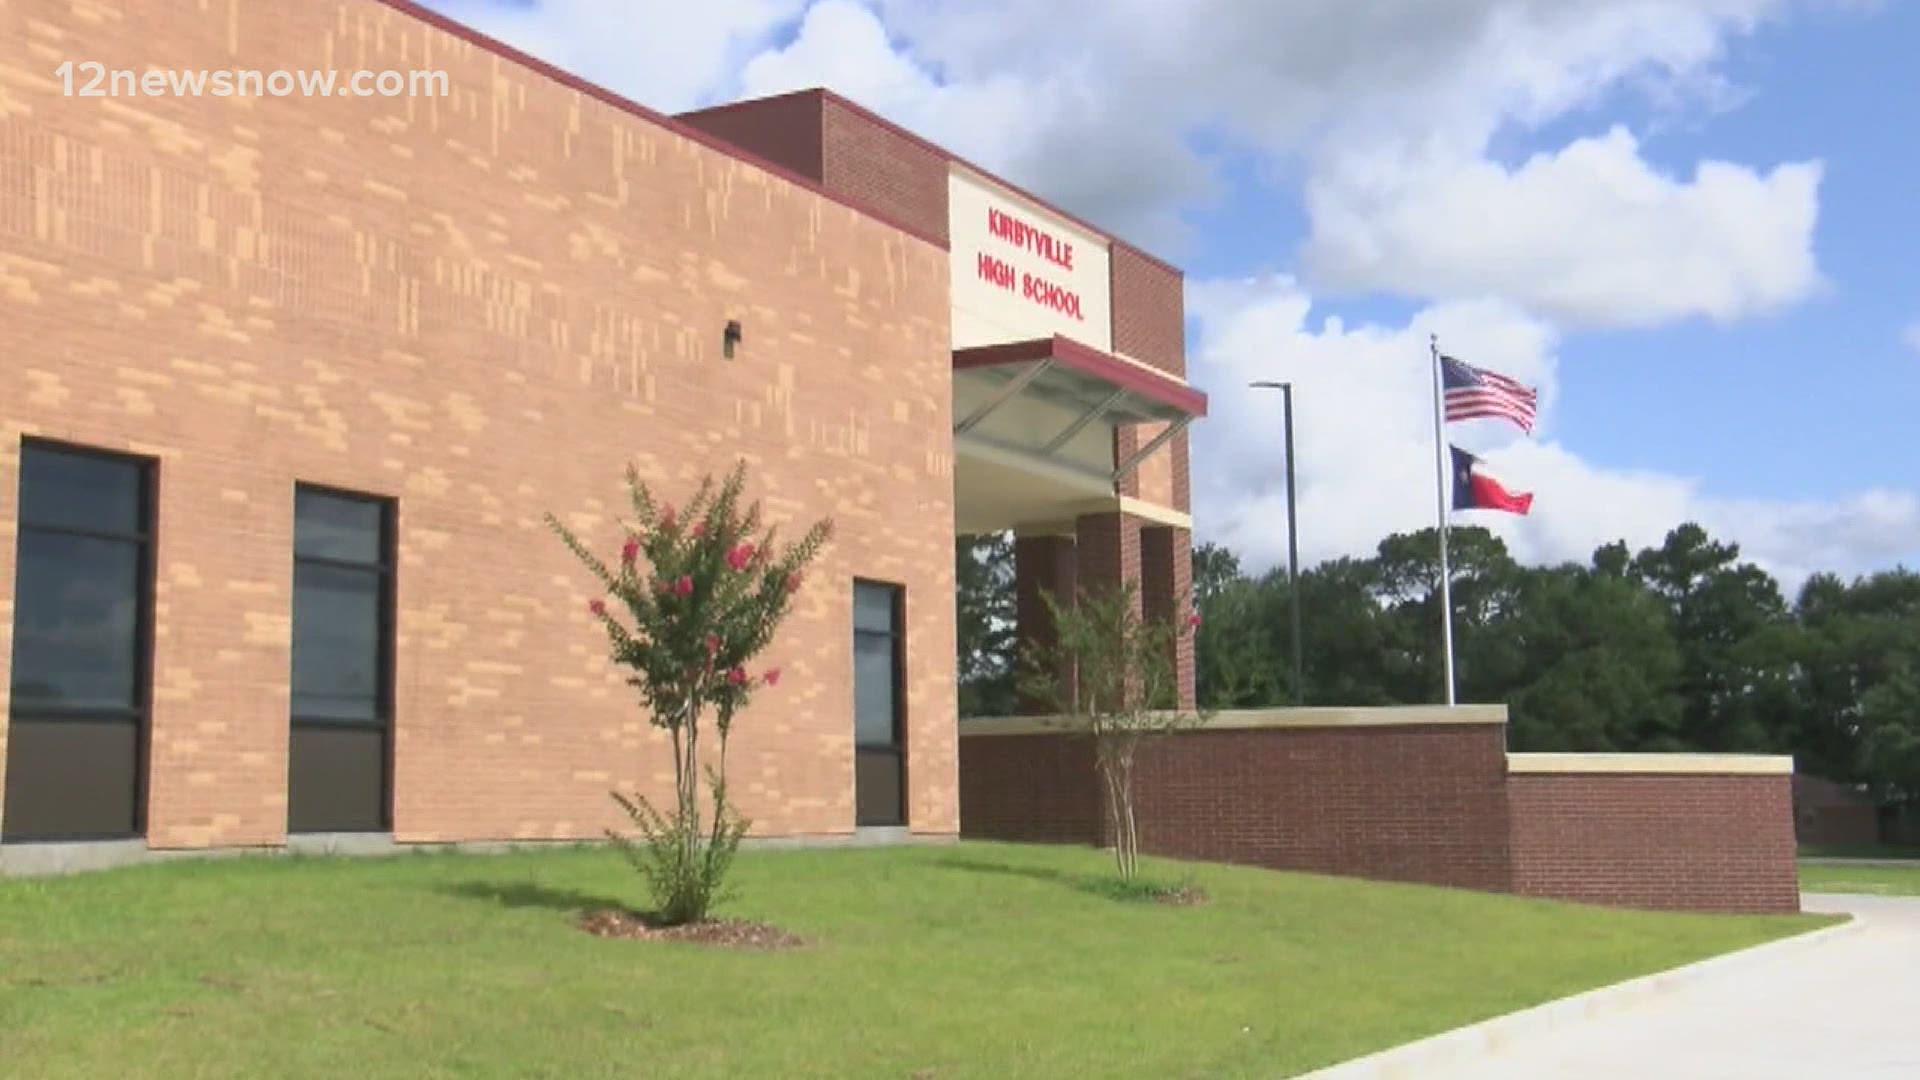 A protest by students at Kirbyville High School erupted Tuesday morning over a 'personnel matter' involving the principal.